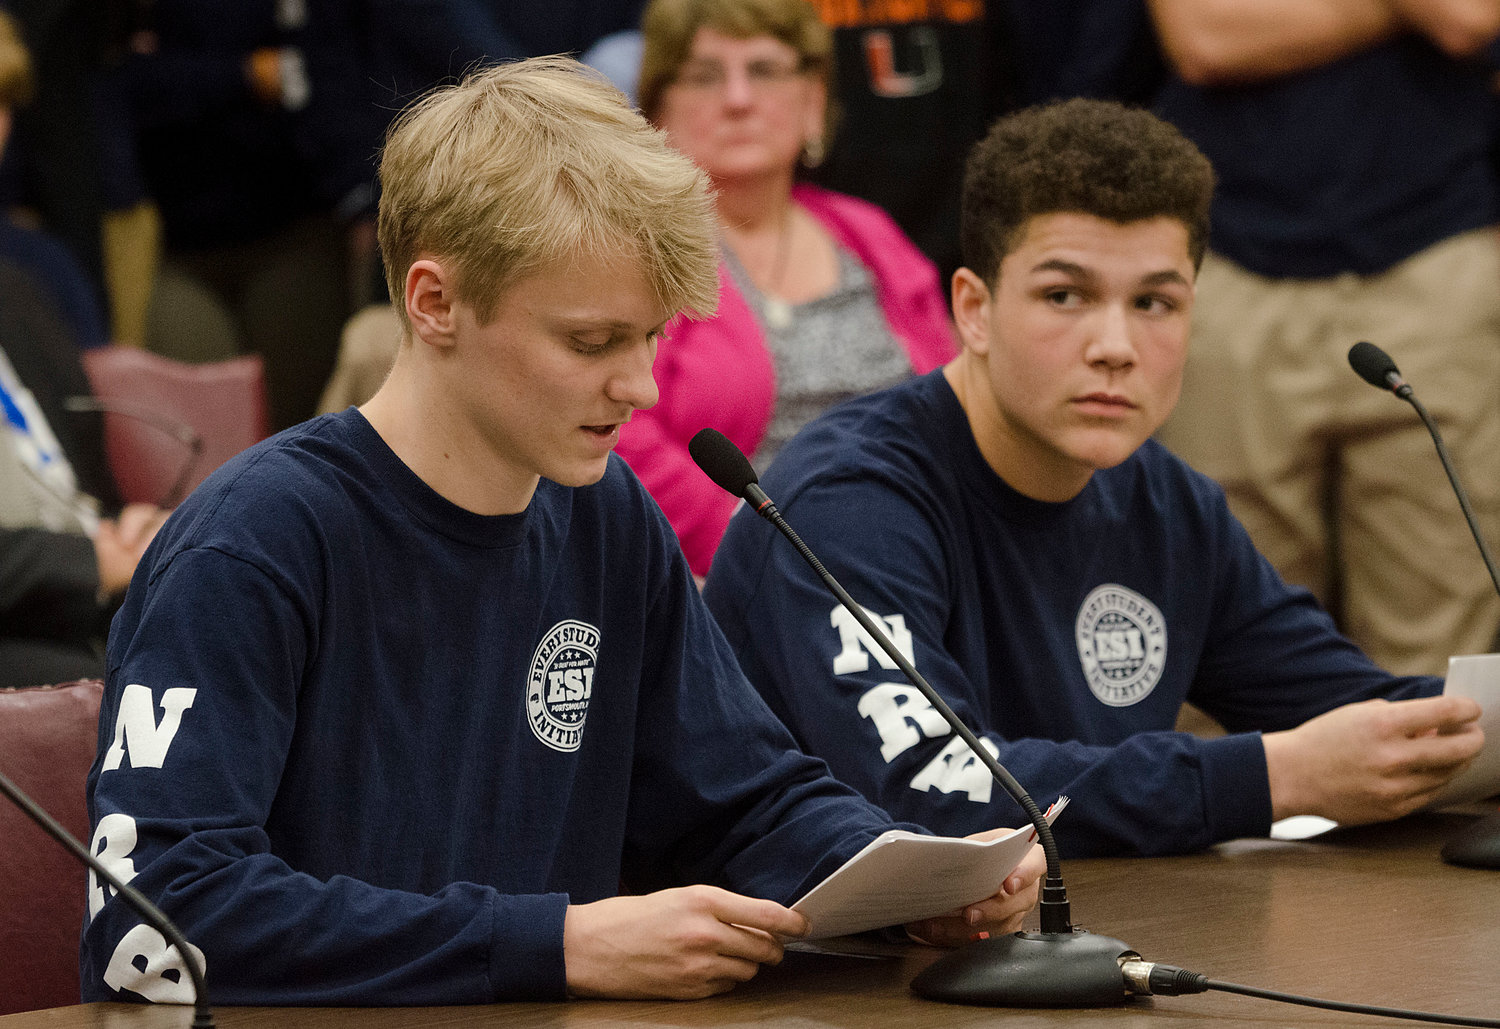 Owen Ross (left) and Marcus Evans, members of Every Student Initiative, testify before the Senate Committee on Education